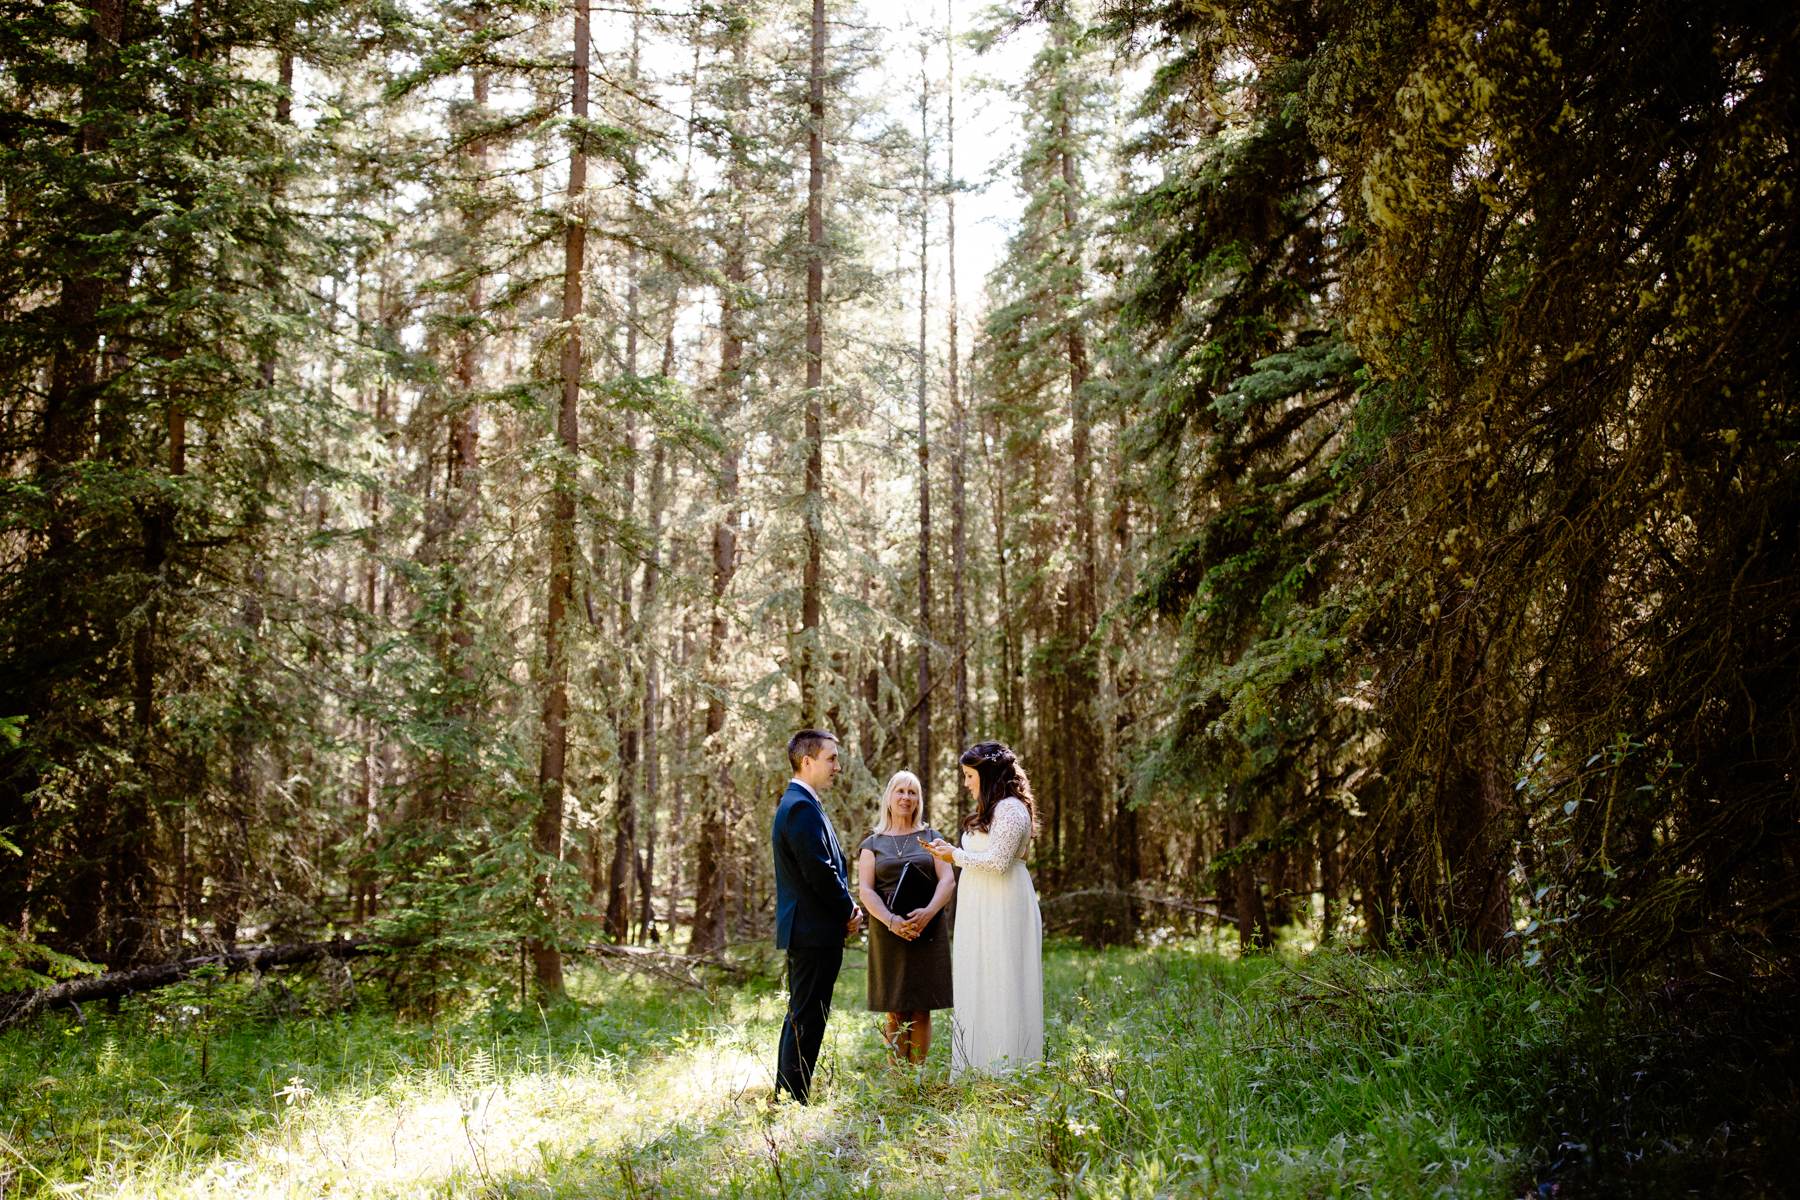 Vow Renewal Photography in Banff - Image 7